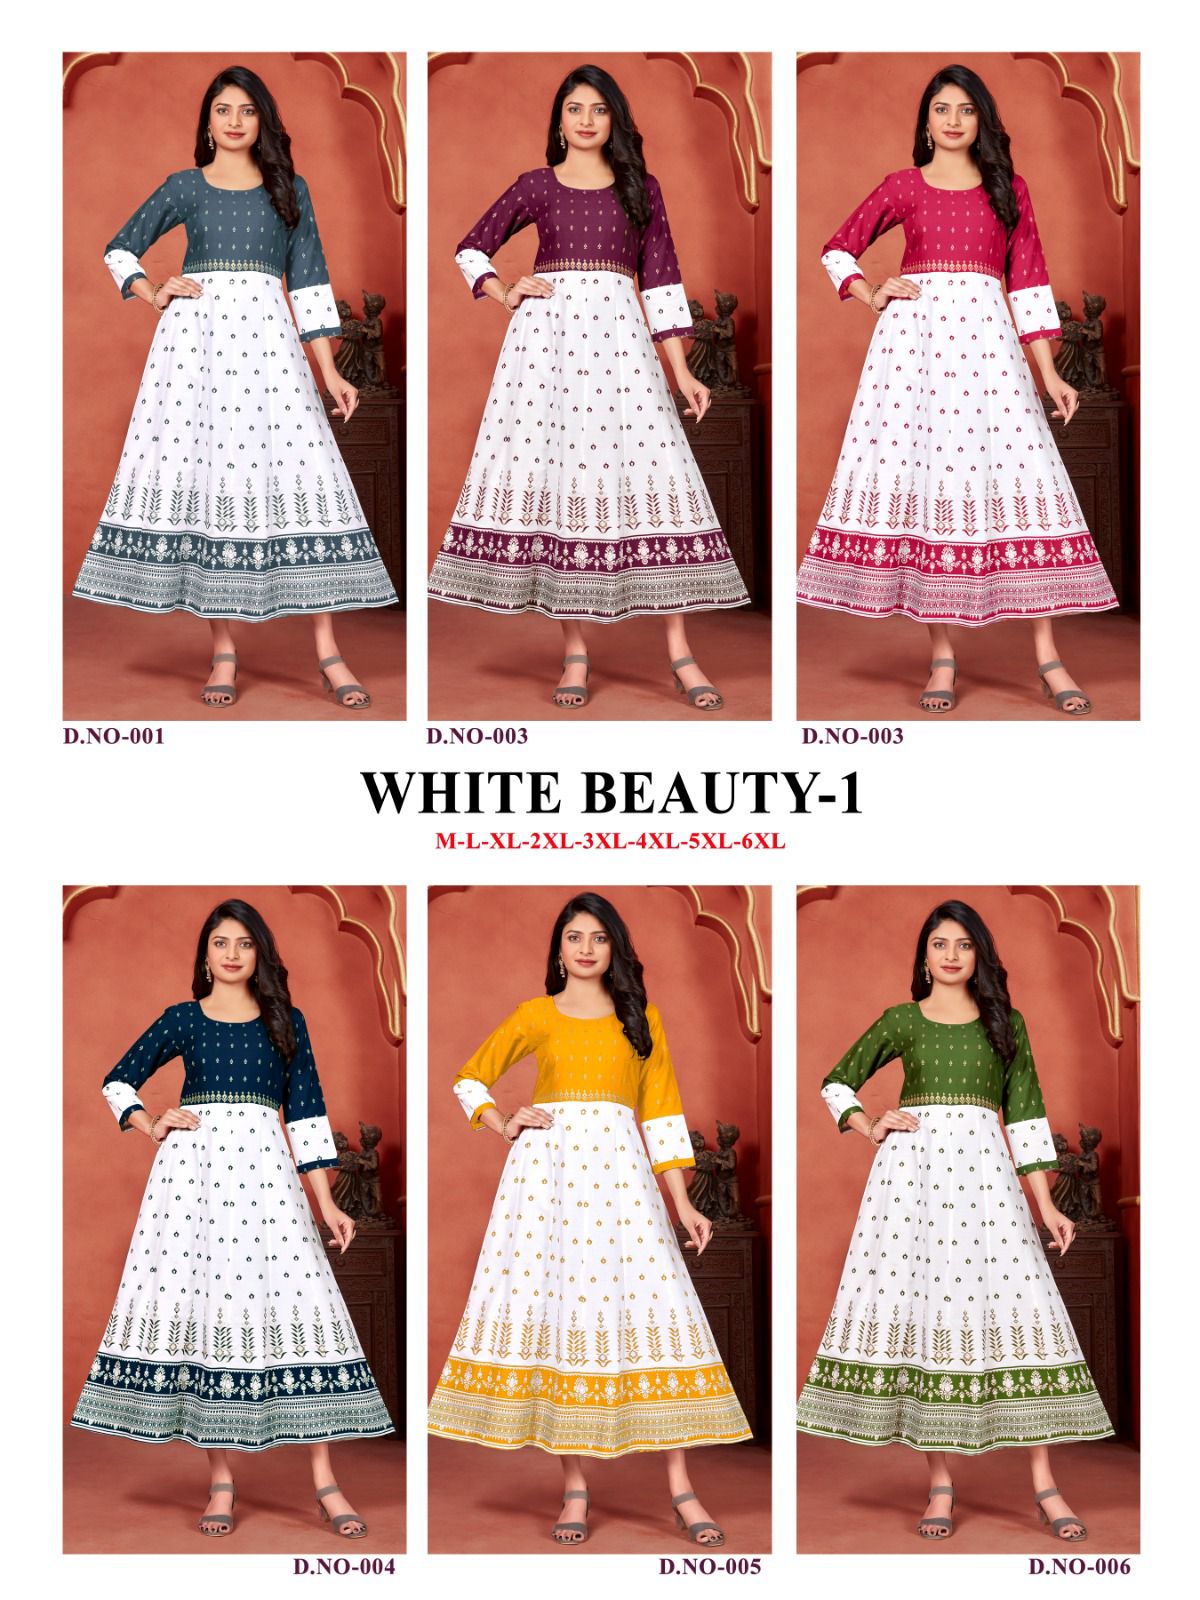 Banwery White Beauty Vol 1 collection 5